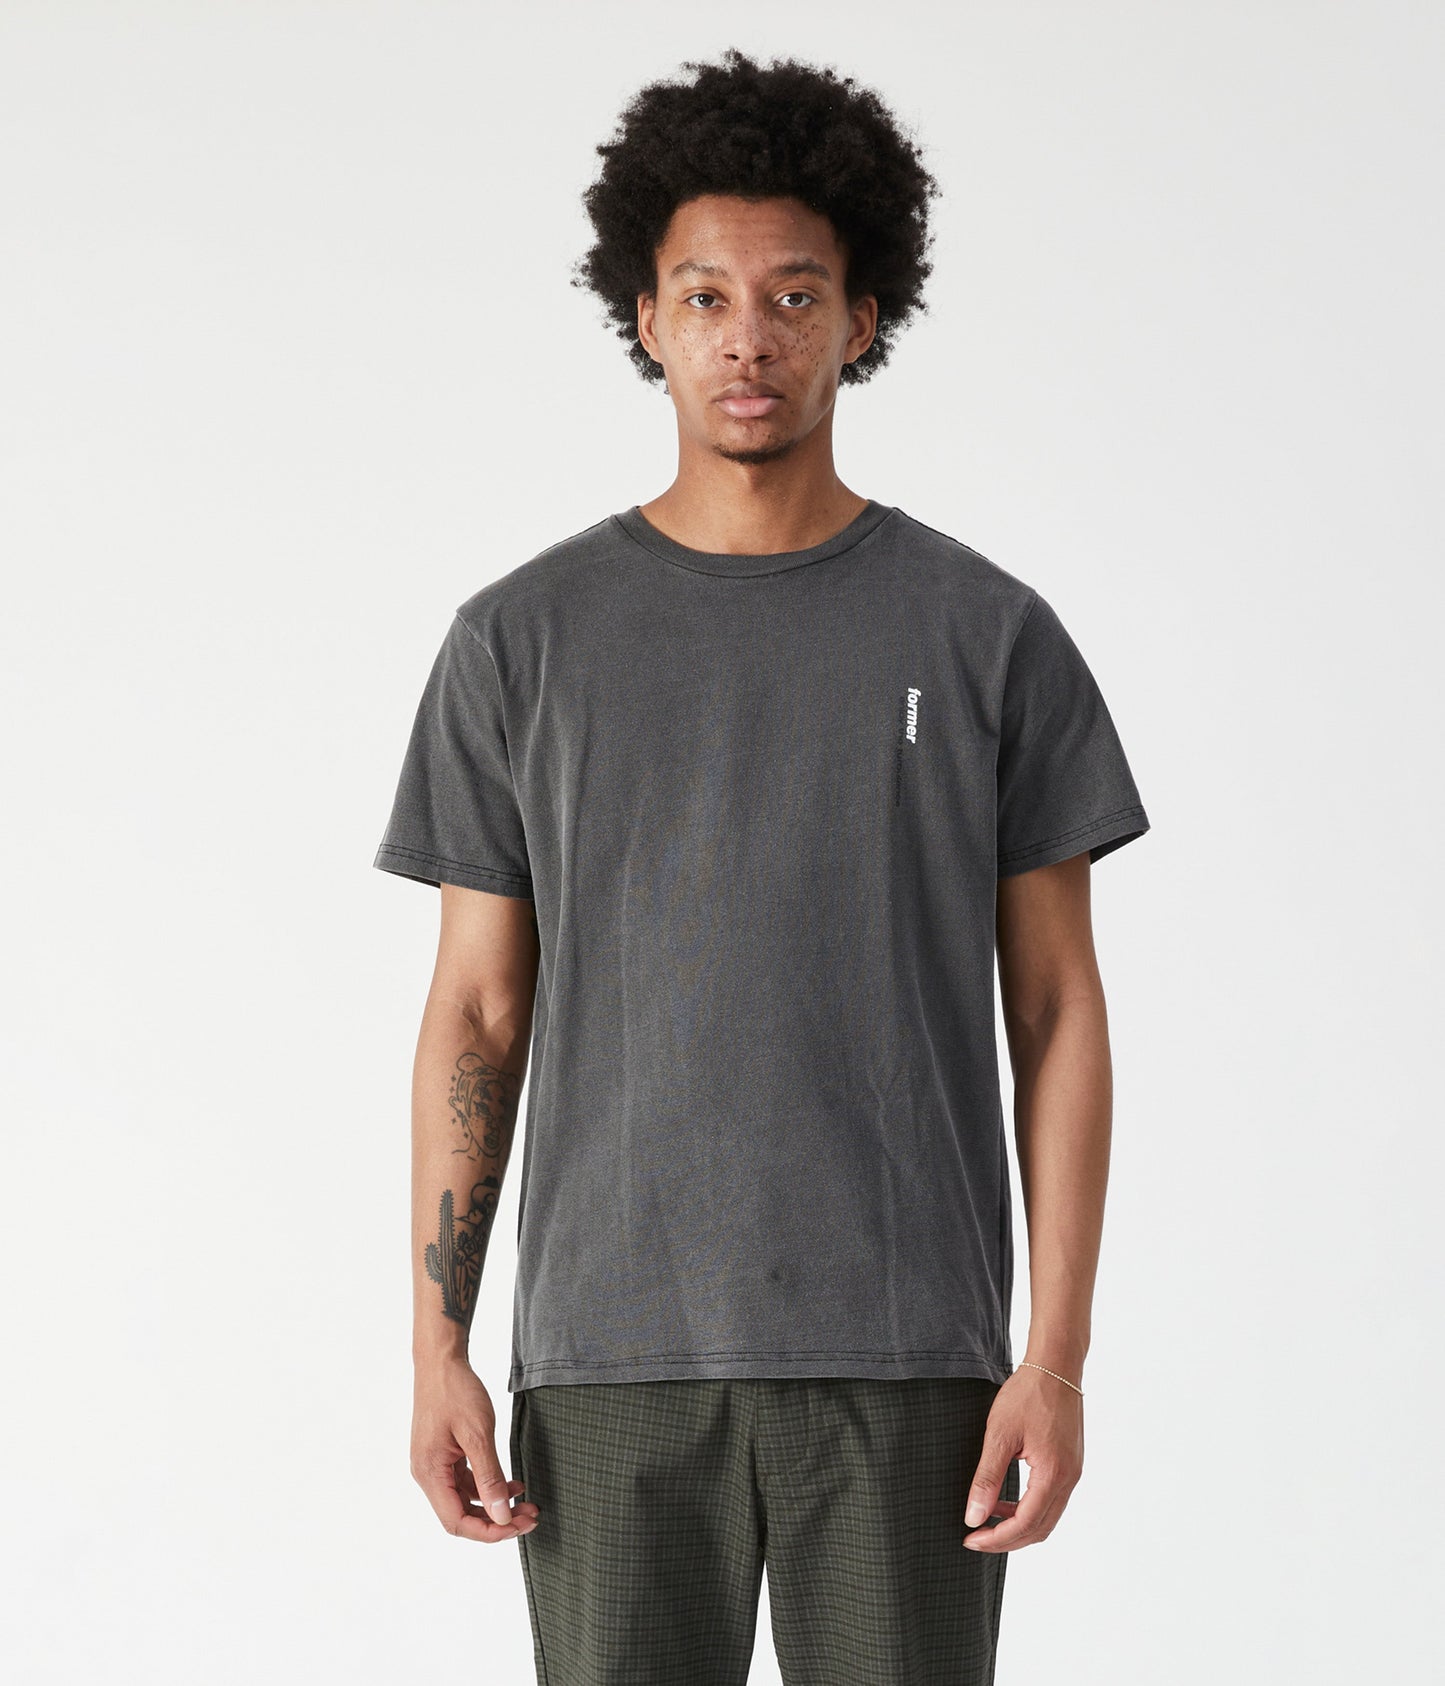 ALL PURPOSE T-SHIRT // WASHED BLACK